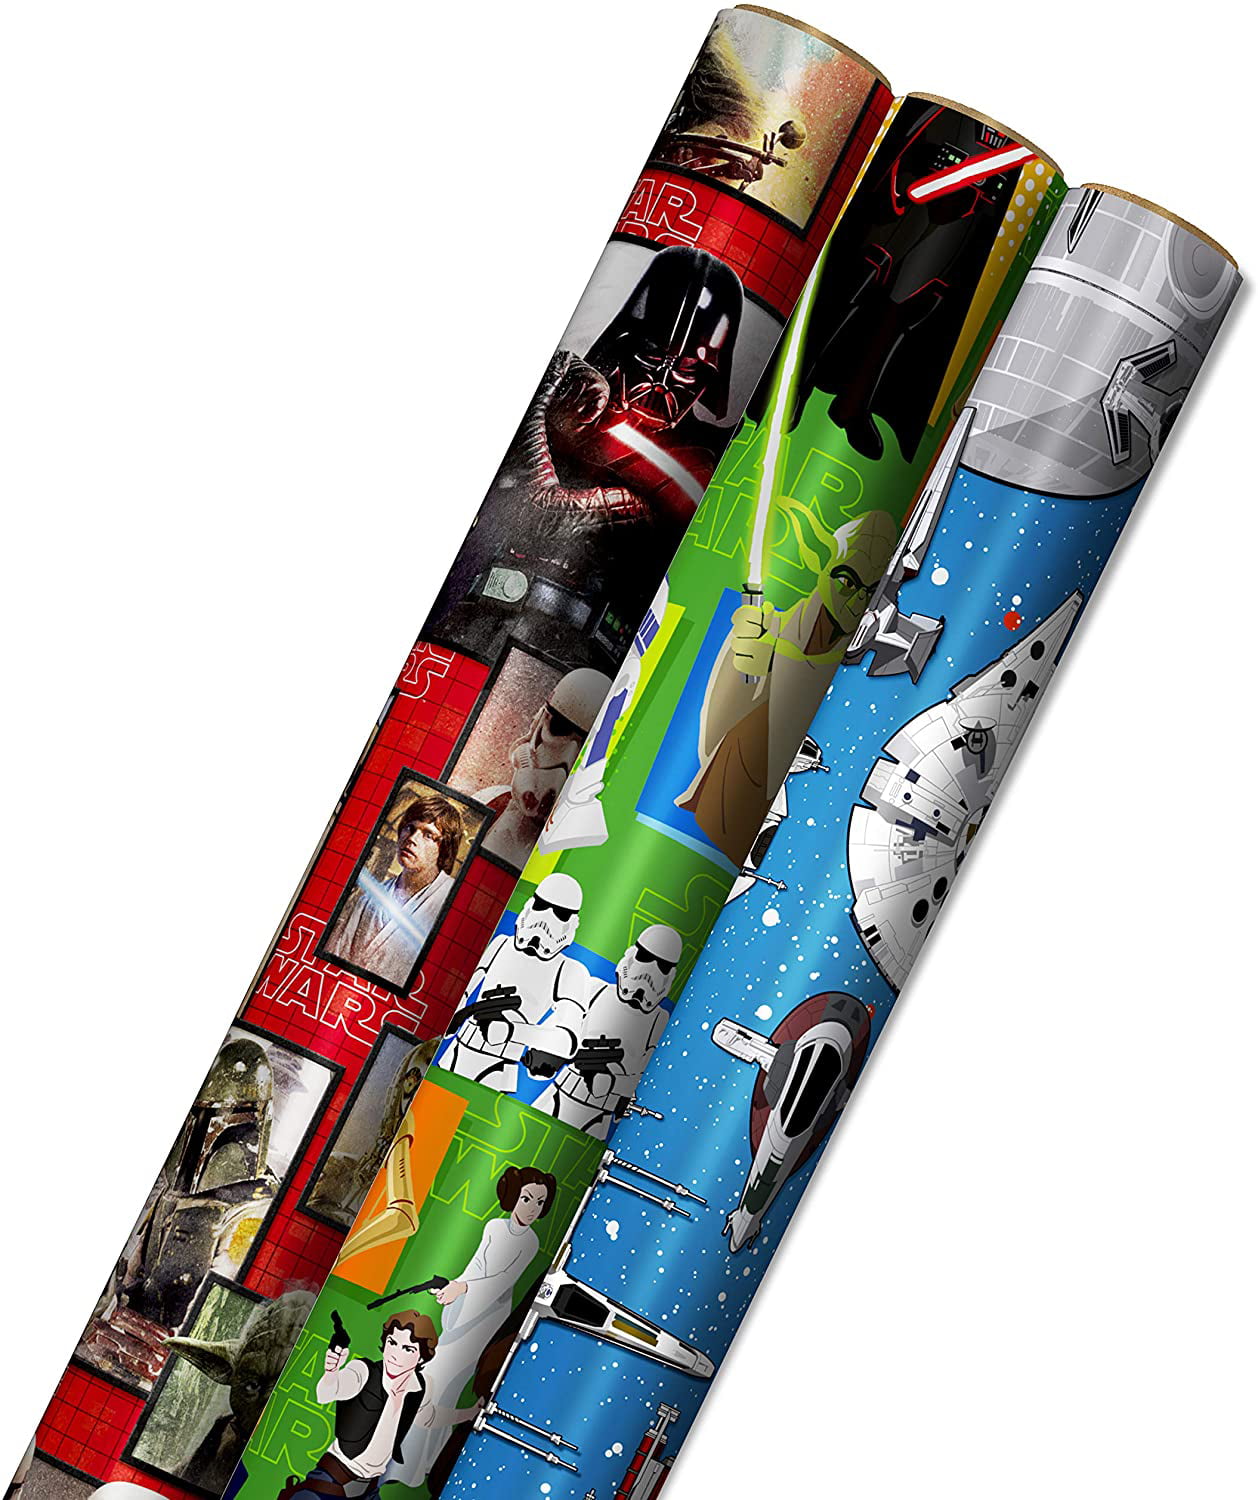 Star Wars Darth Vader and Stormtroopers Christmas Wrapping Paper Roll, We  Don't Want to Unwrap Presents Anymore — These Wrapping Papers Are Way Too  Cute!